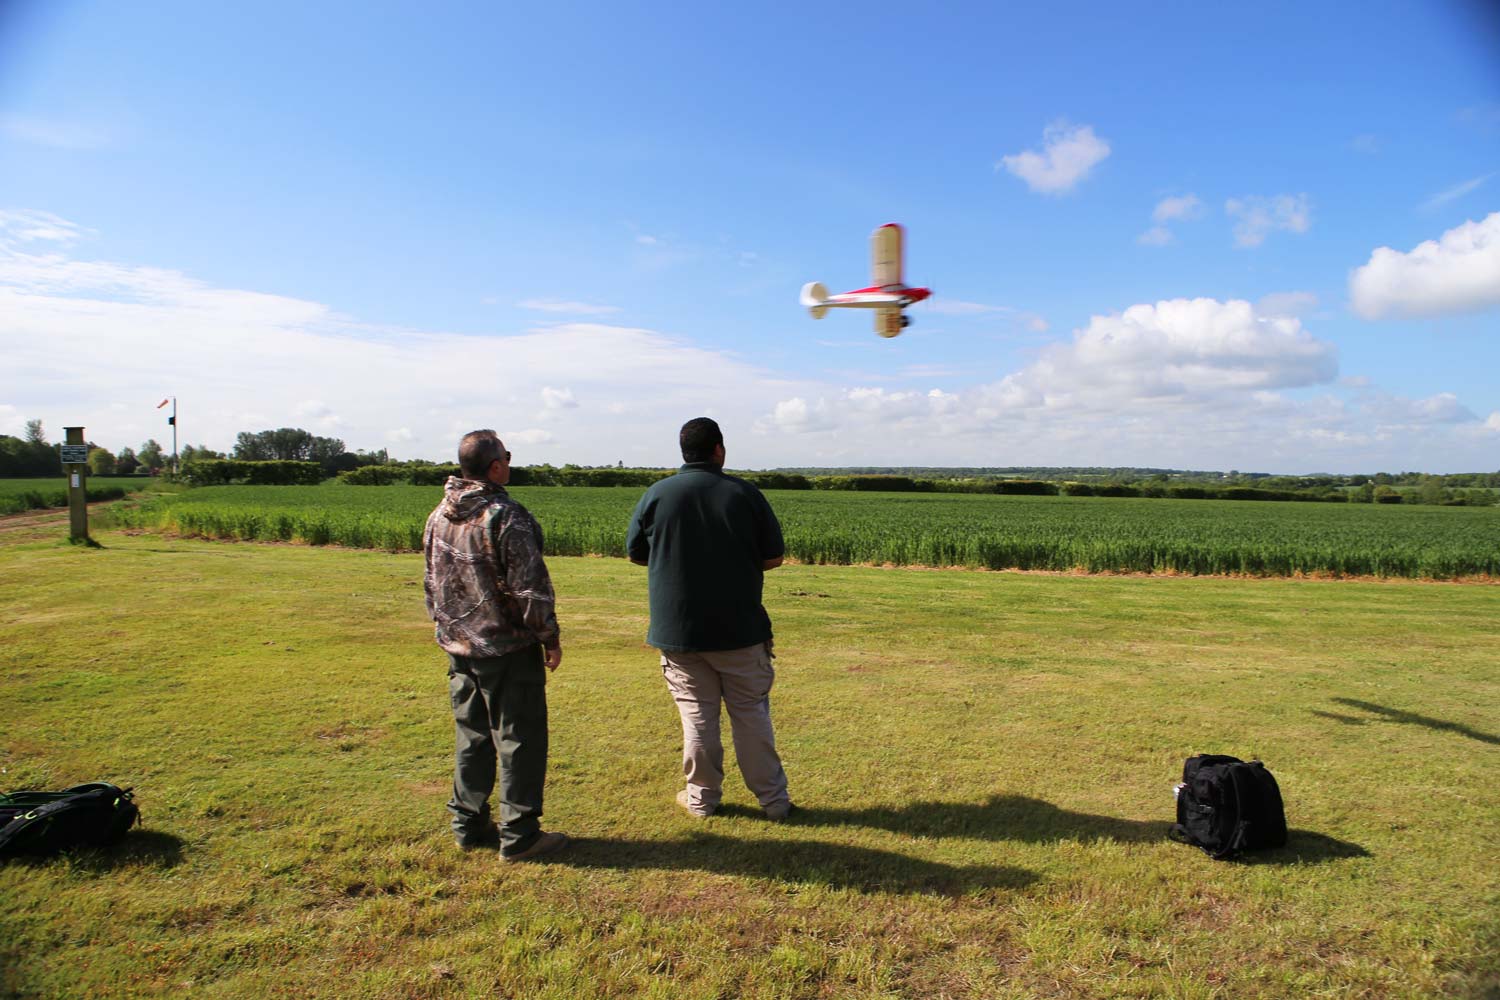 Customers flying a model aircraft around Pete’s Airgun Farm in Essex